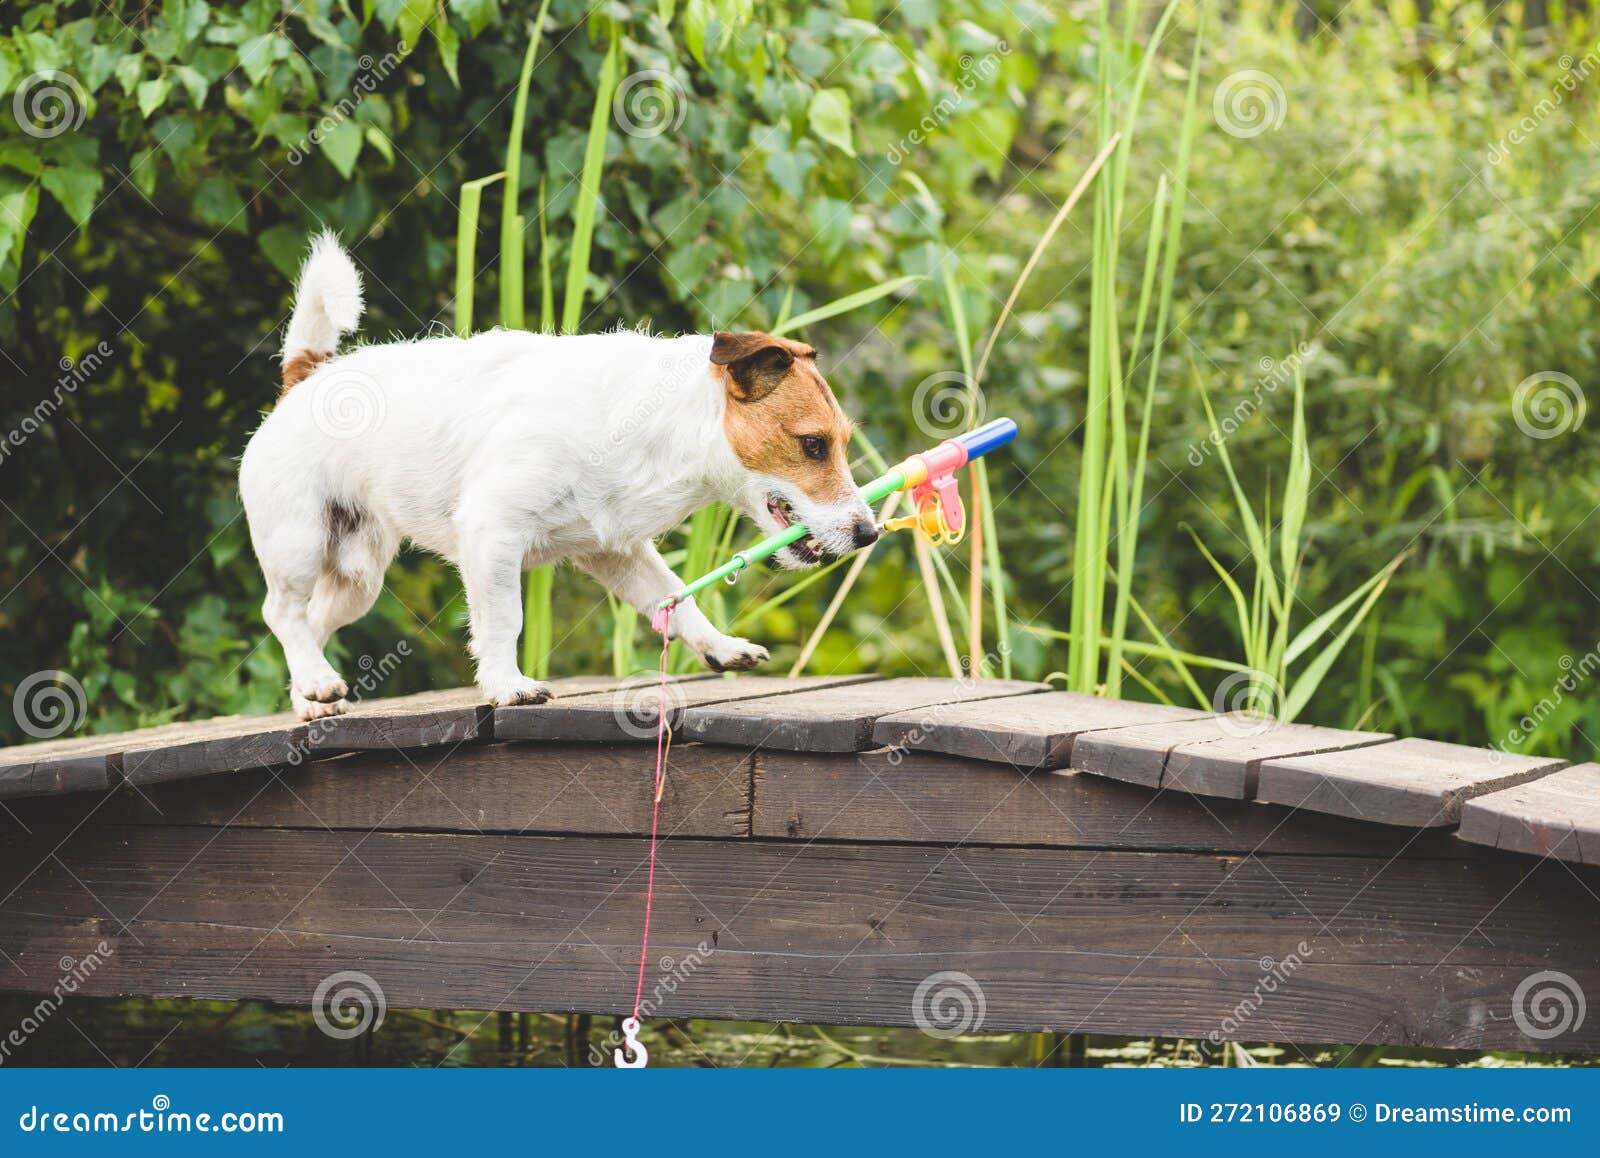 https://thumbs.dreamstime.com/z/dog-as-funny-fisherman-toy-fishing-rod-going-to-catch-fish-humorous-concept-hobby-jack-russell-terrier-fetches-272106869.jpg